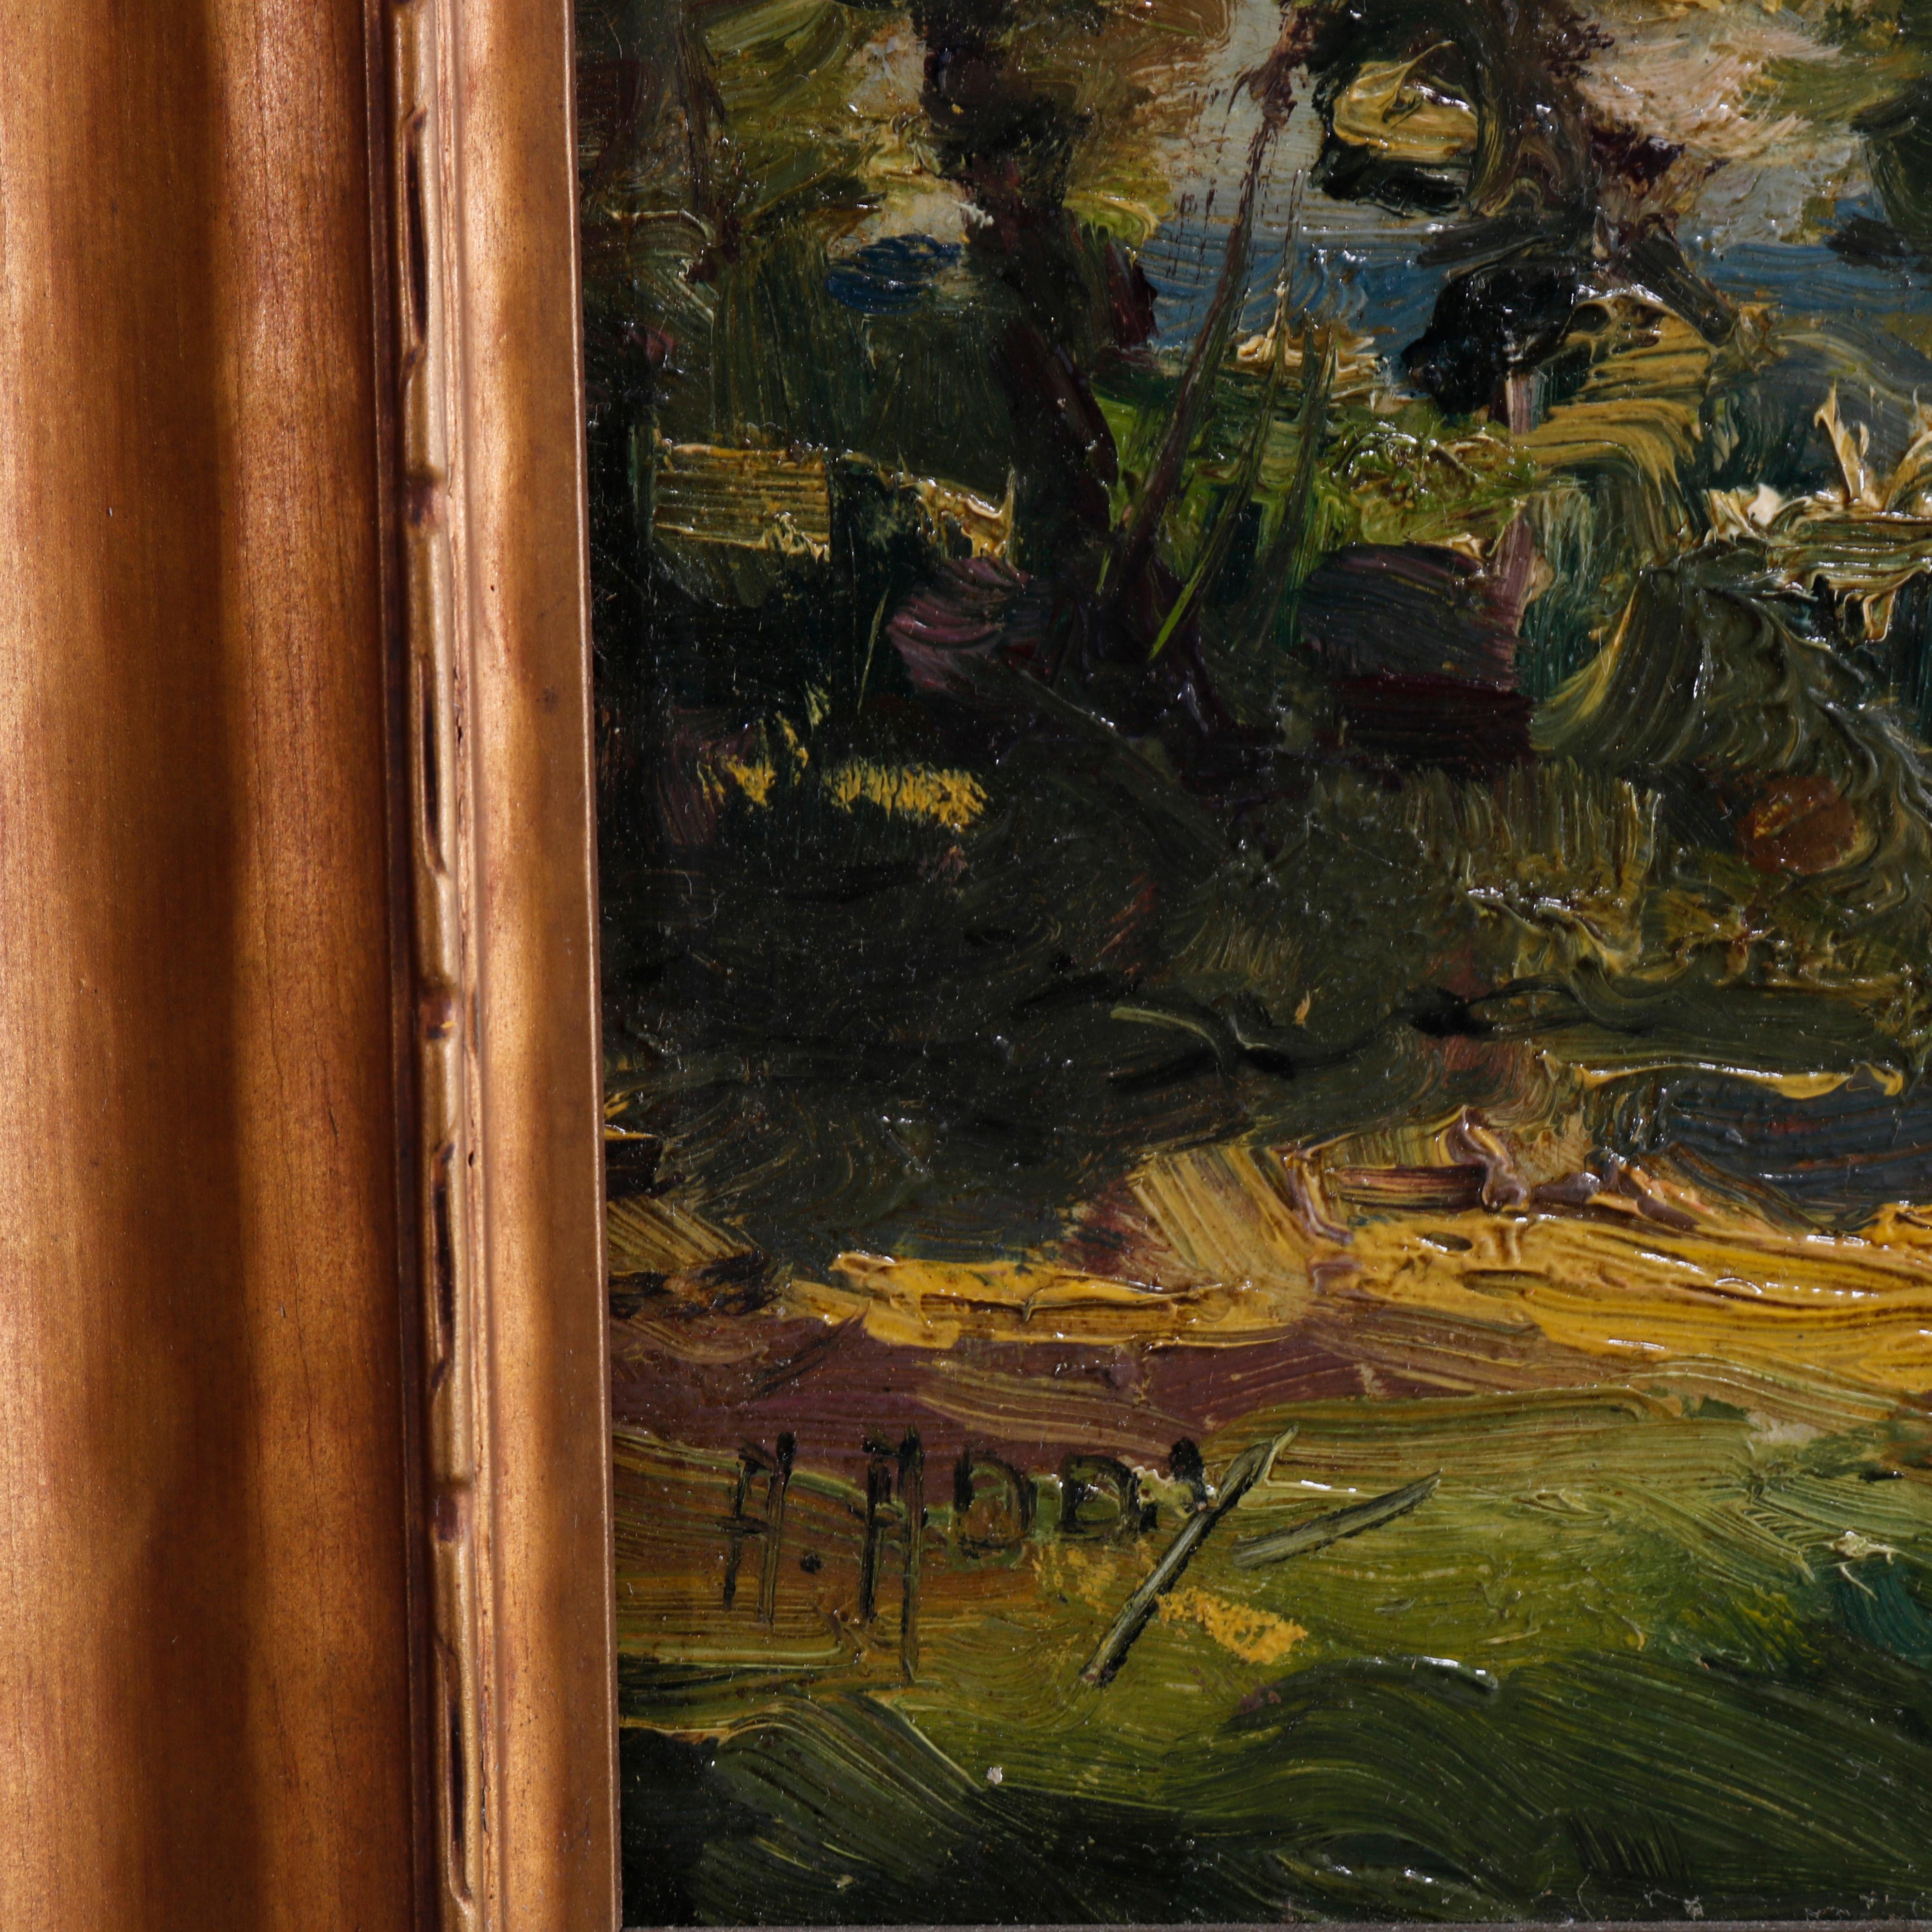 Wood Antique Impressionist Painting Landscape with Figure, Signed A. Addy, Circa 1910